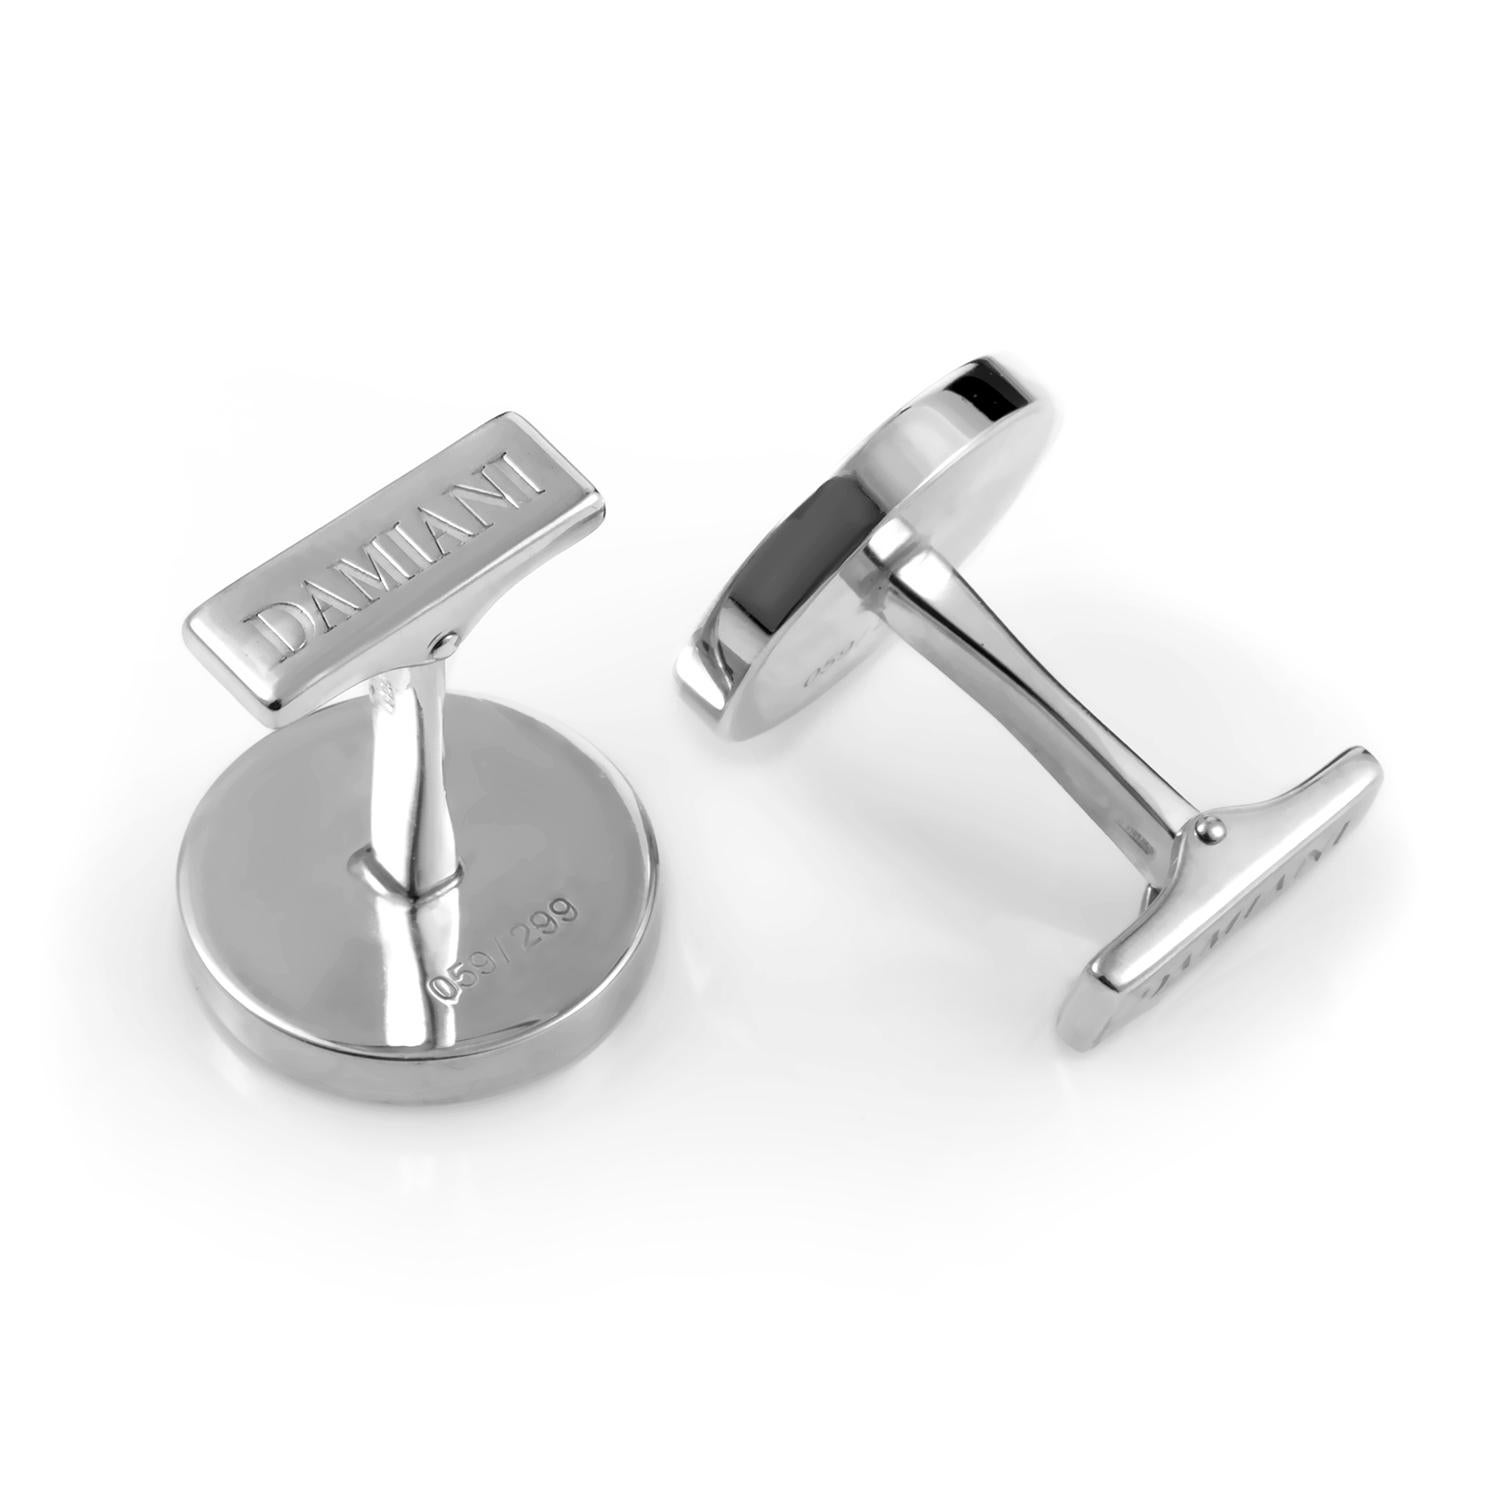 Damiani has produced a handsome pair of cufflinks. Each cufflink boasts a Silver body framing 18K Yellow Gold coin-styled motifs.
